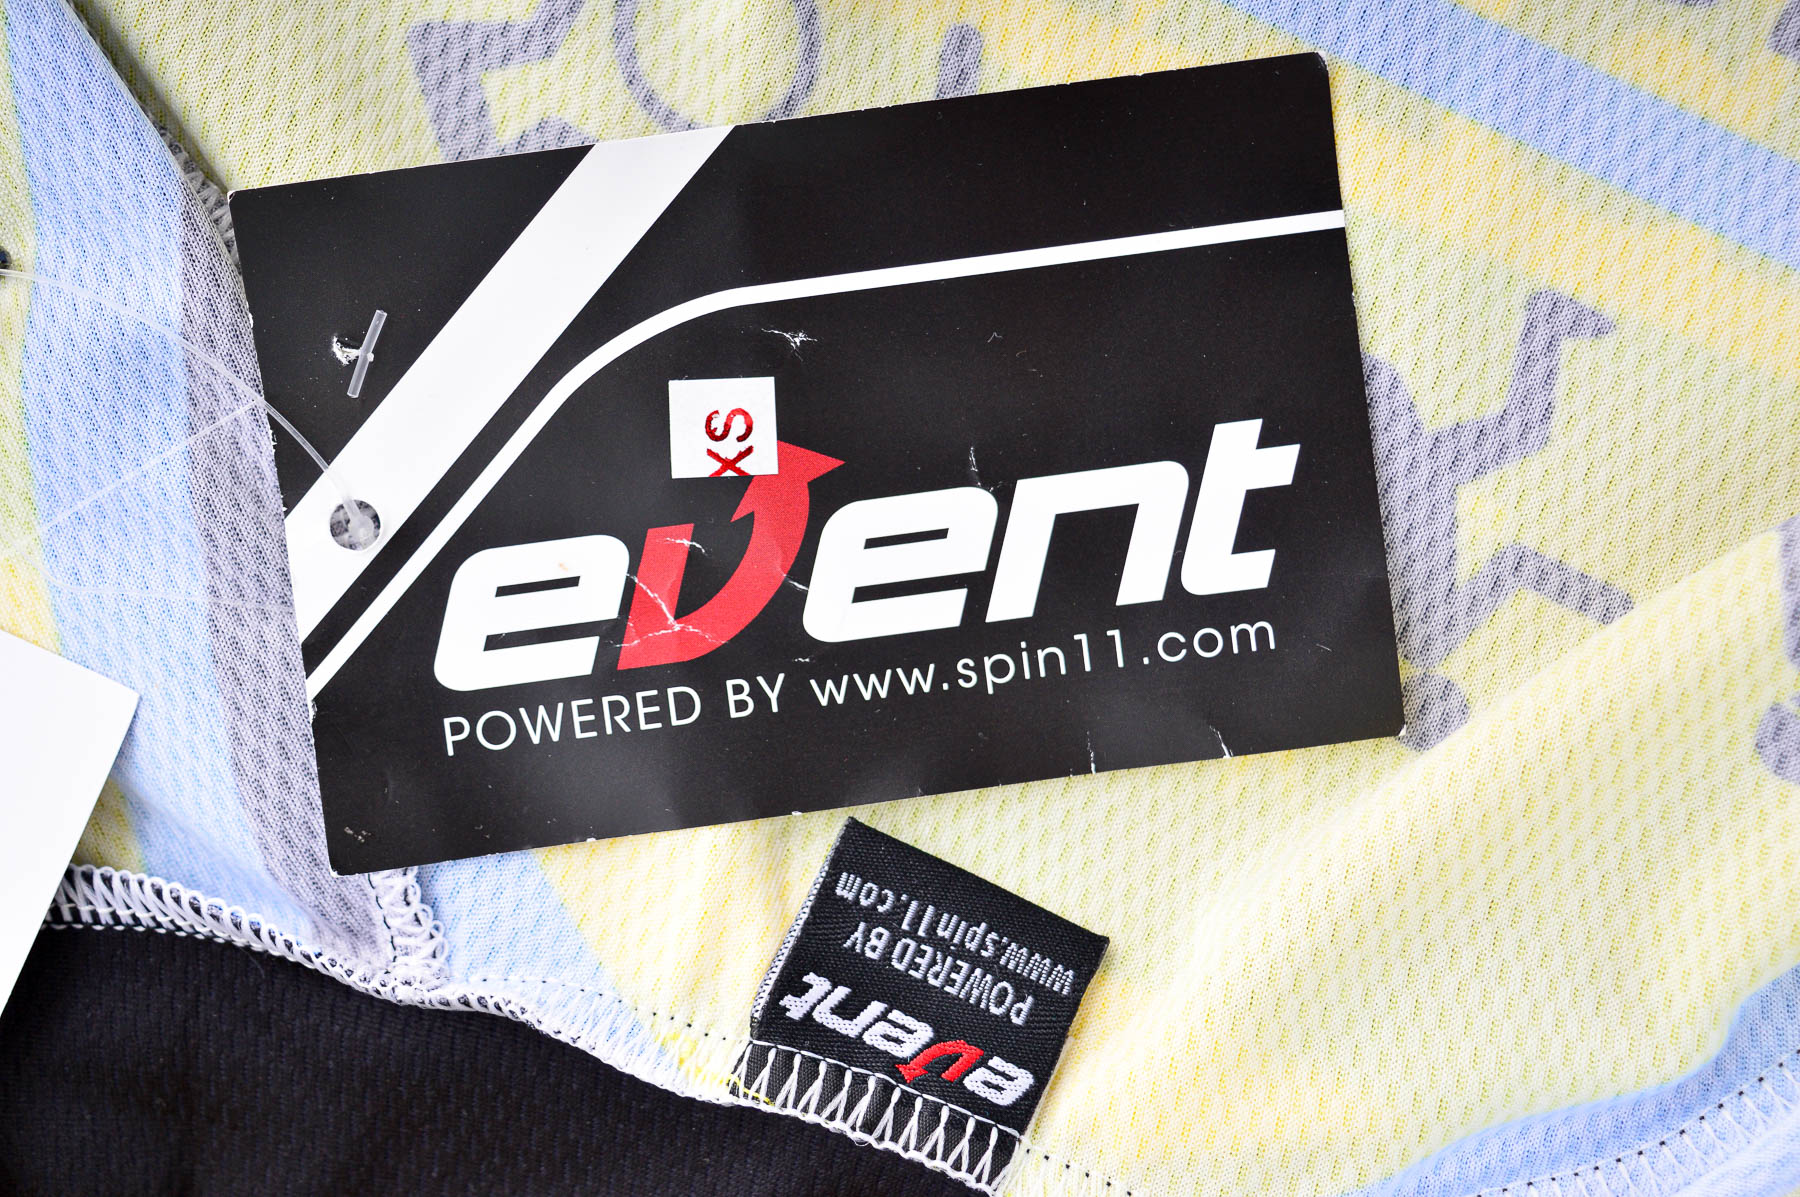 Male sports top for cycling - Event powered by Spin11 - 2